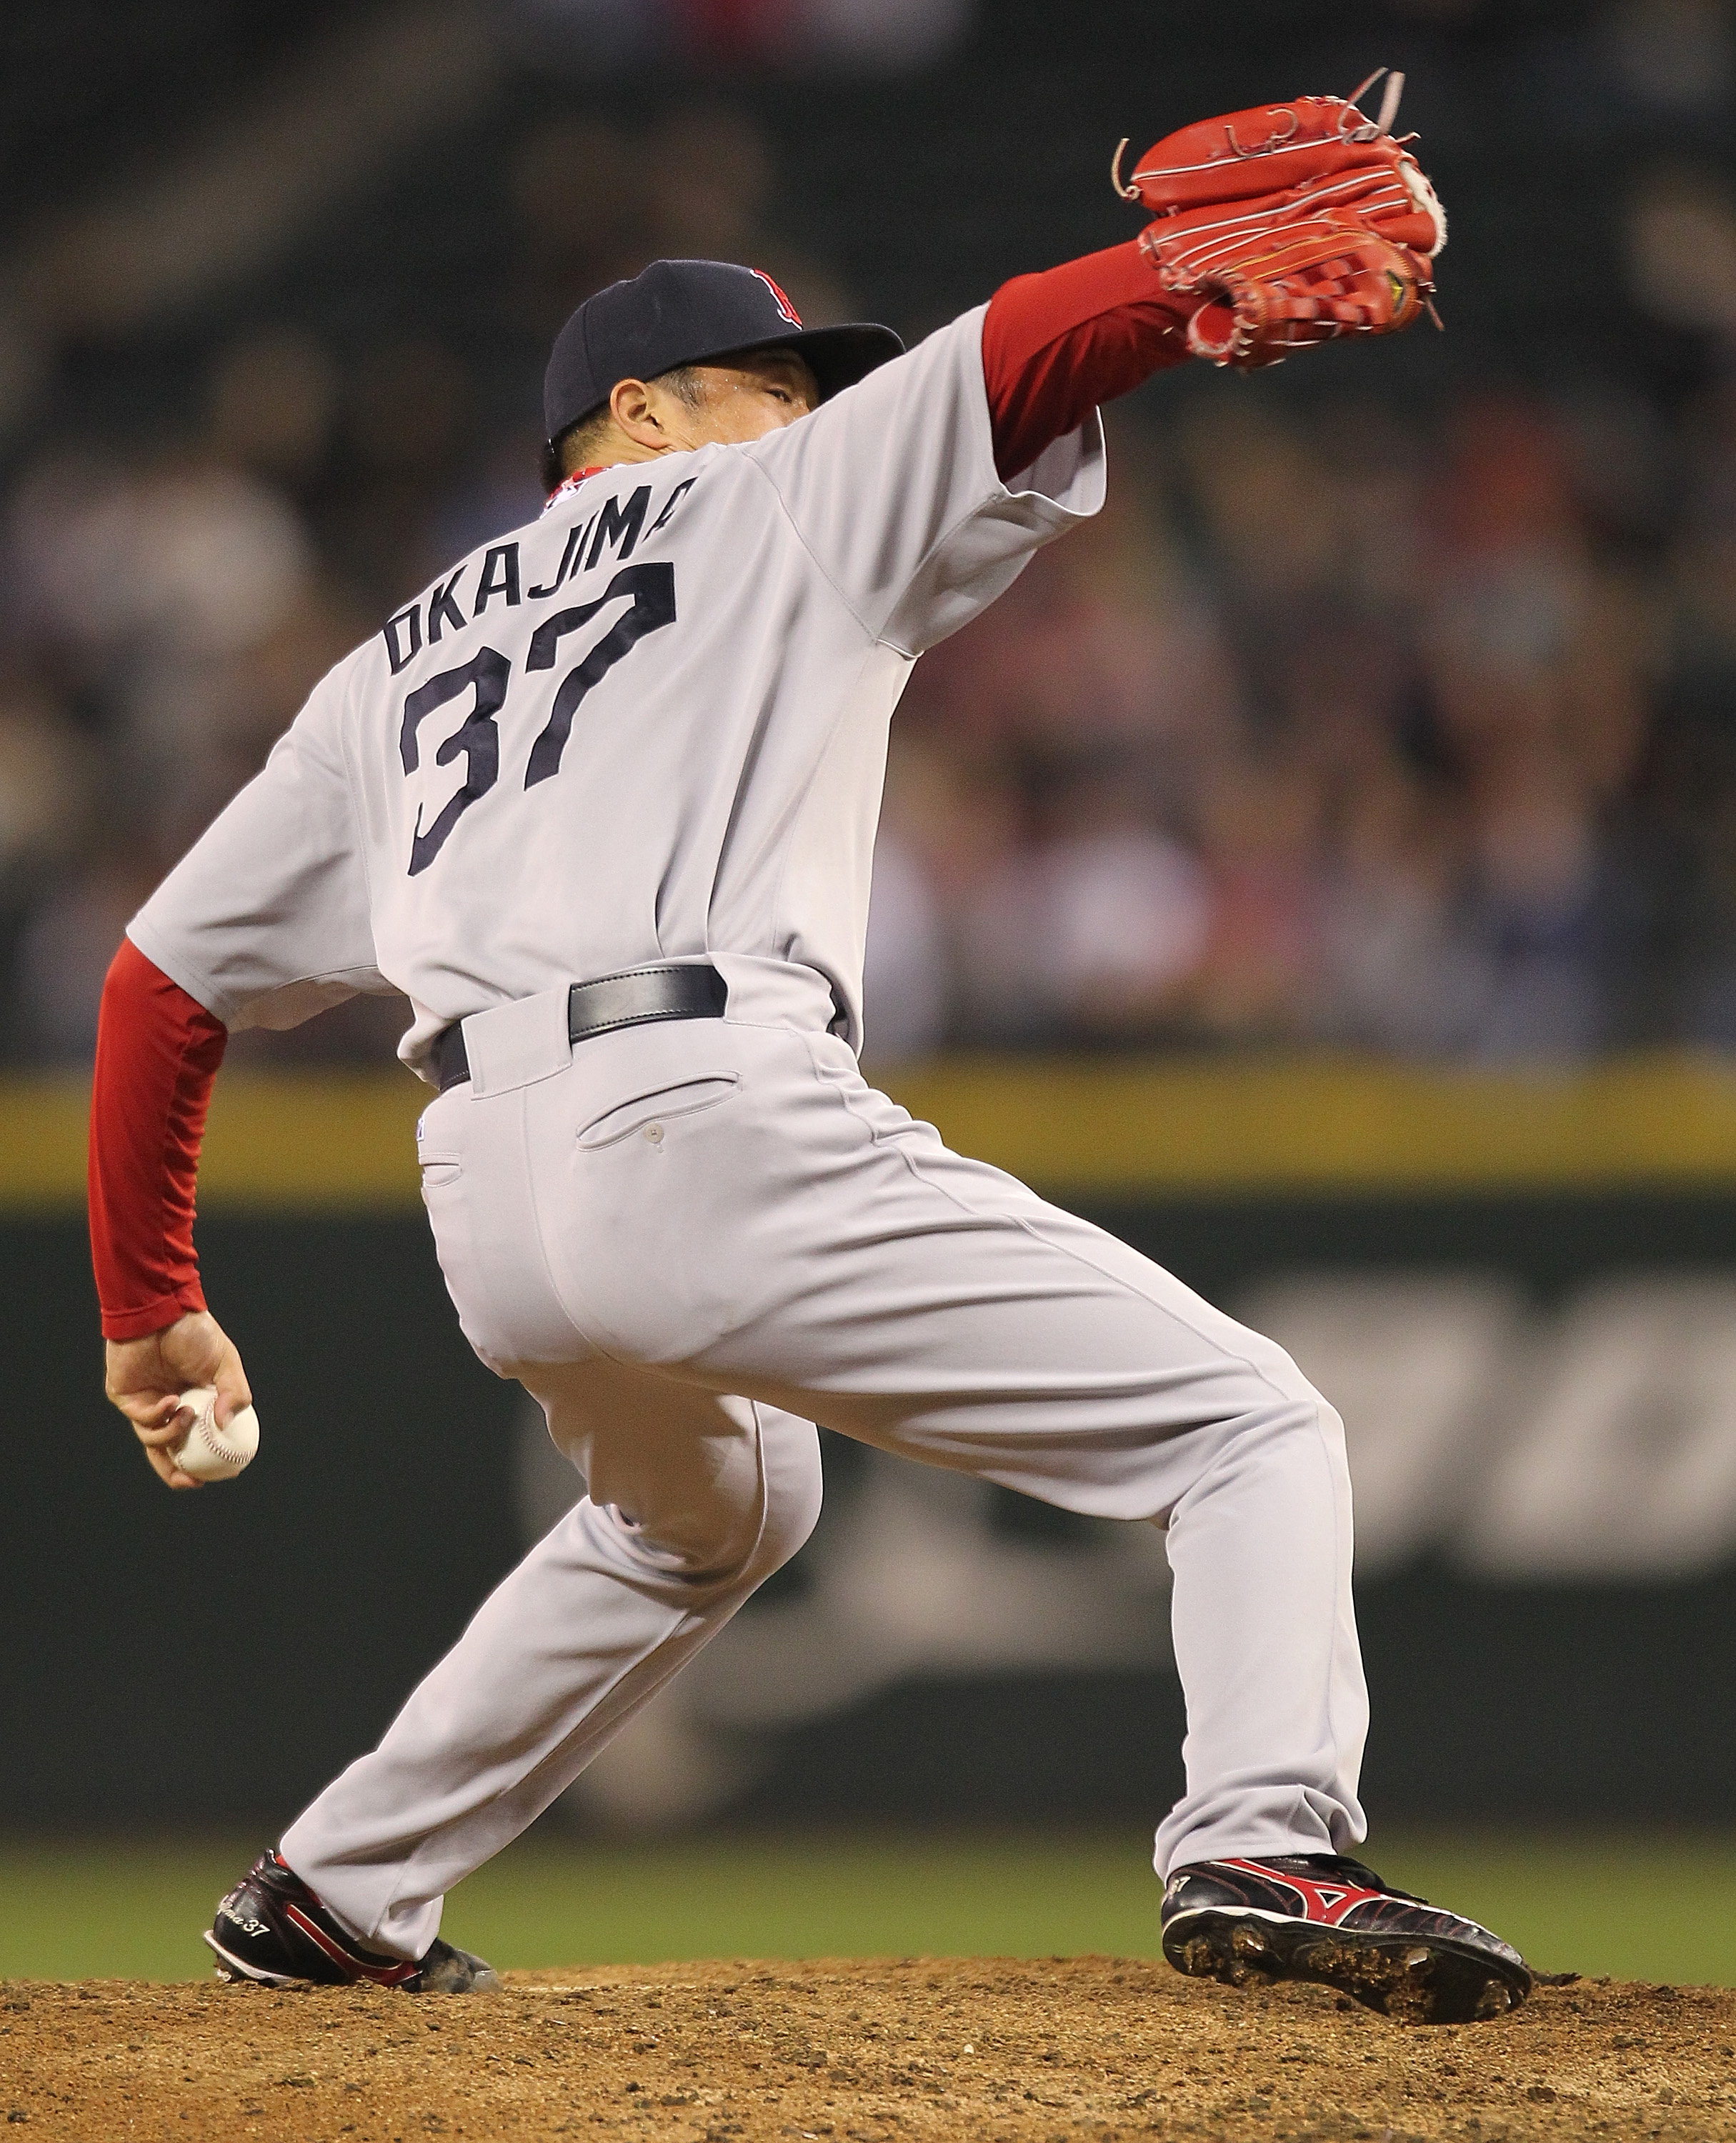 SEATTLE - SEPTEMBER 14:  Relief pitcher Hideki Okajima #37 of the Boston Red Sox pitches against the Seattle Mariners at Safeco Field on September 14, 2010 in Seattle, Washington. (Photo by Otto Greule Jr/Getty Images)